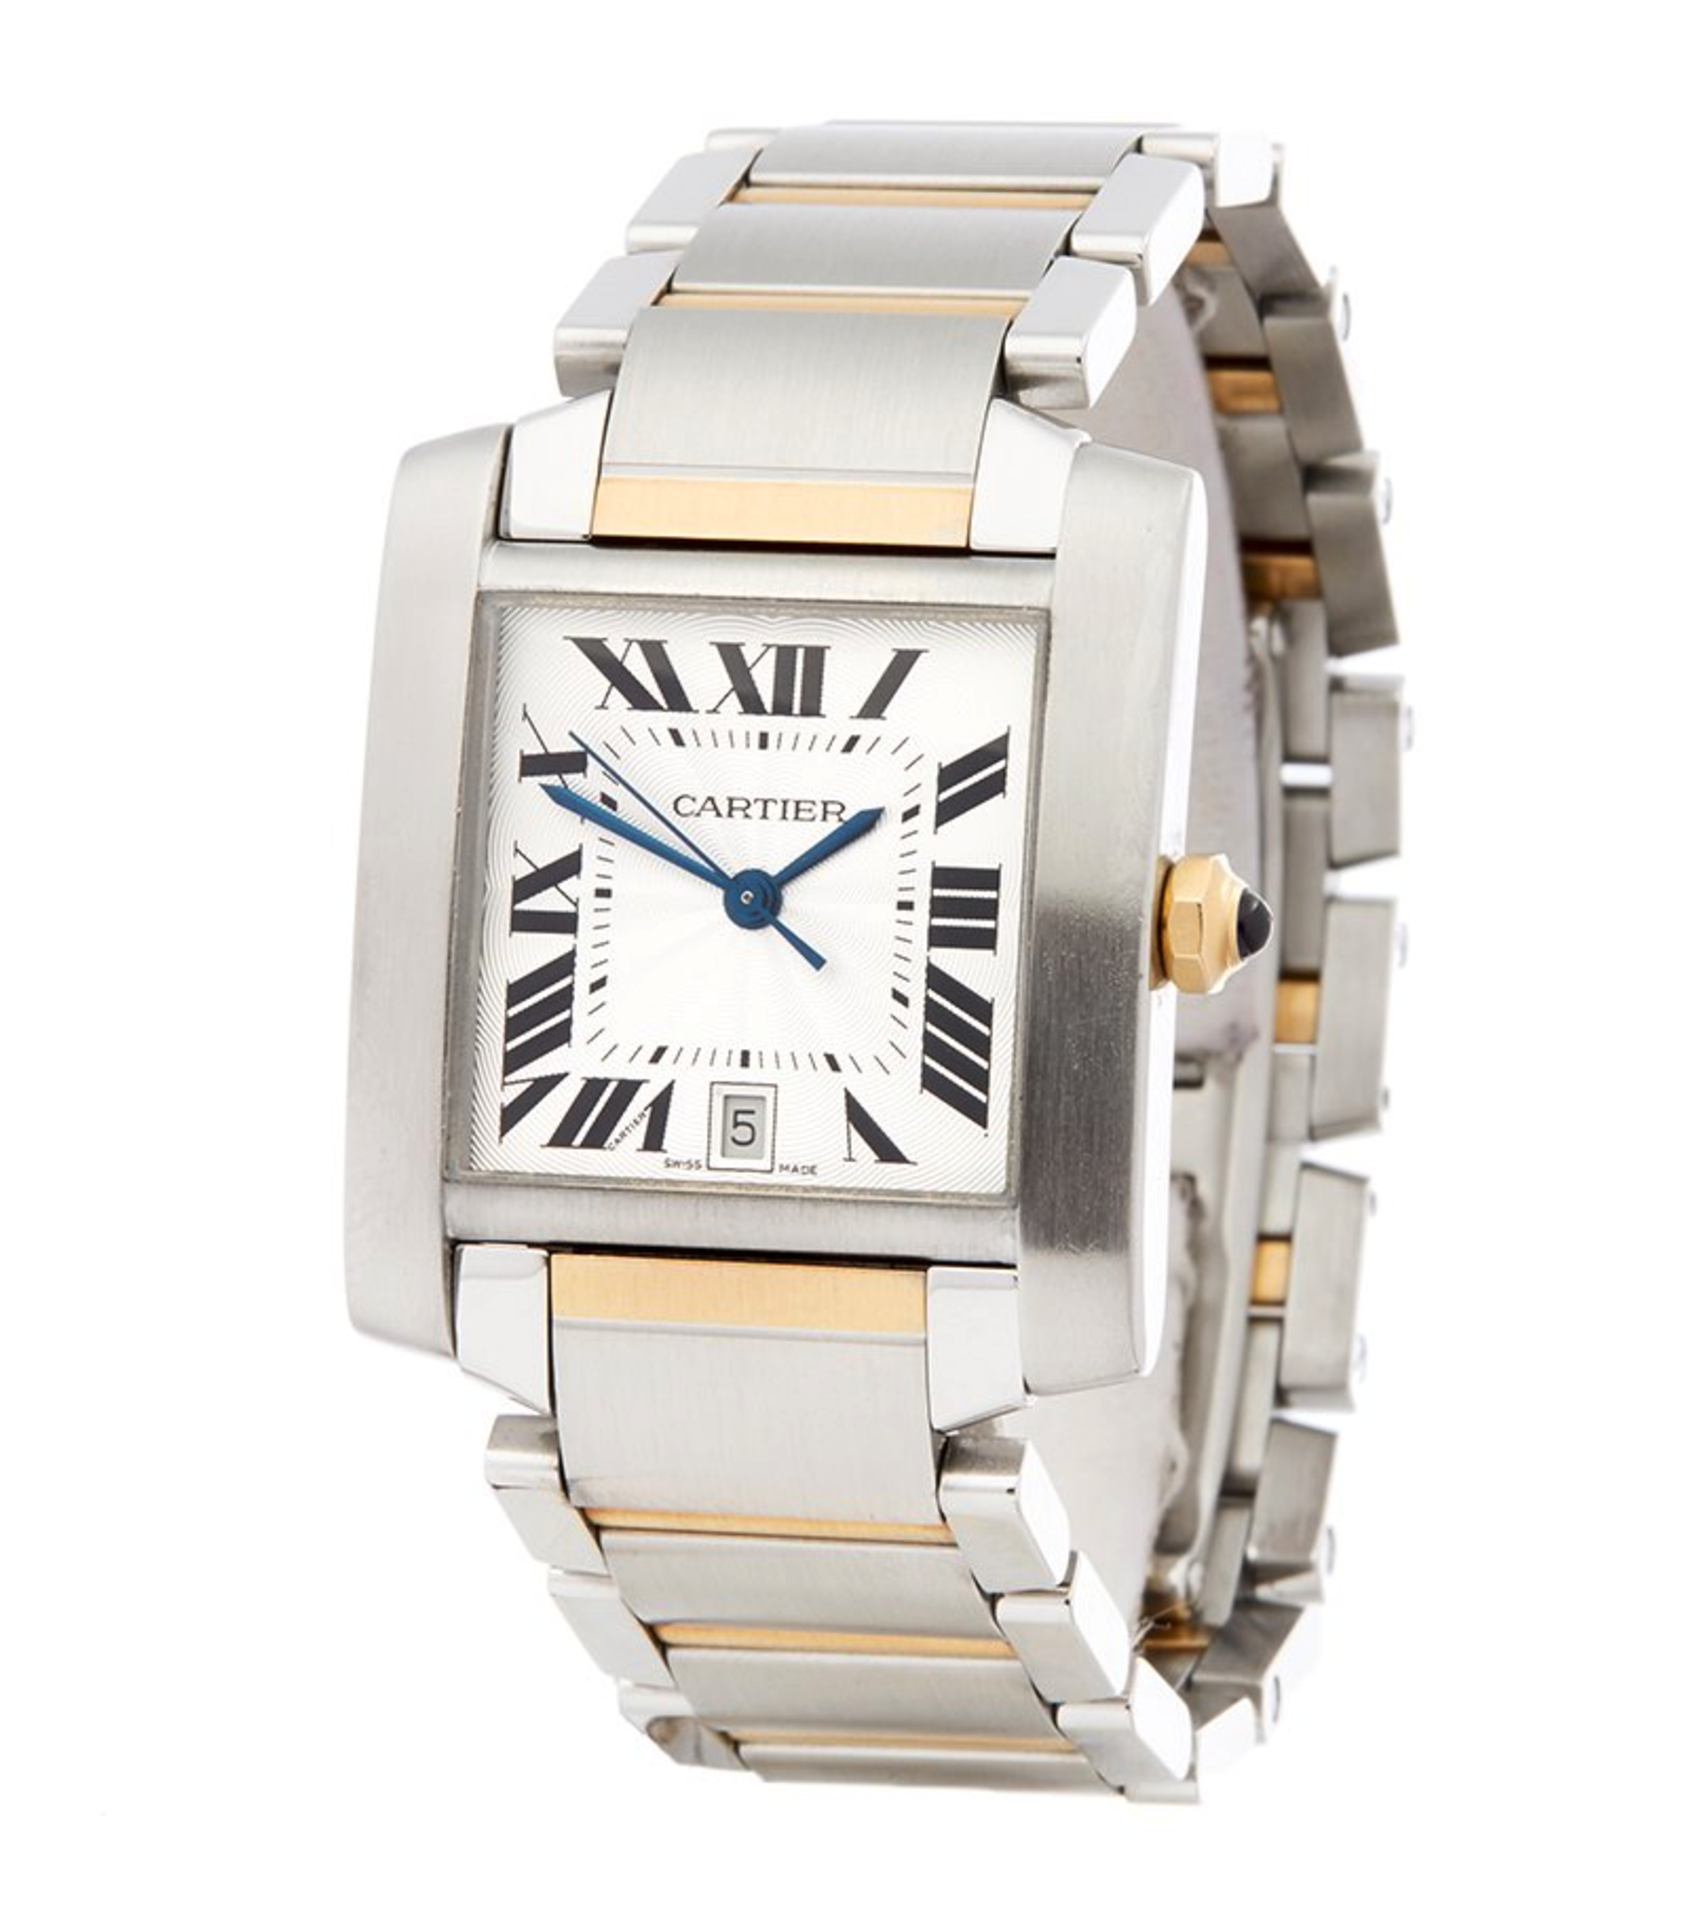 Cartier Tank Francaise Stainless Steel & 18K Yellow Gold - W51005Q4 - Image 7 of 7